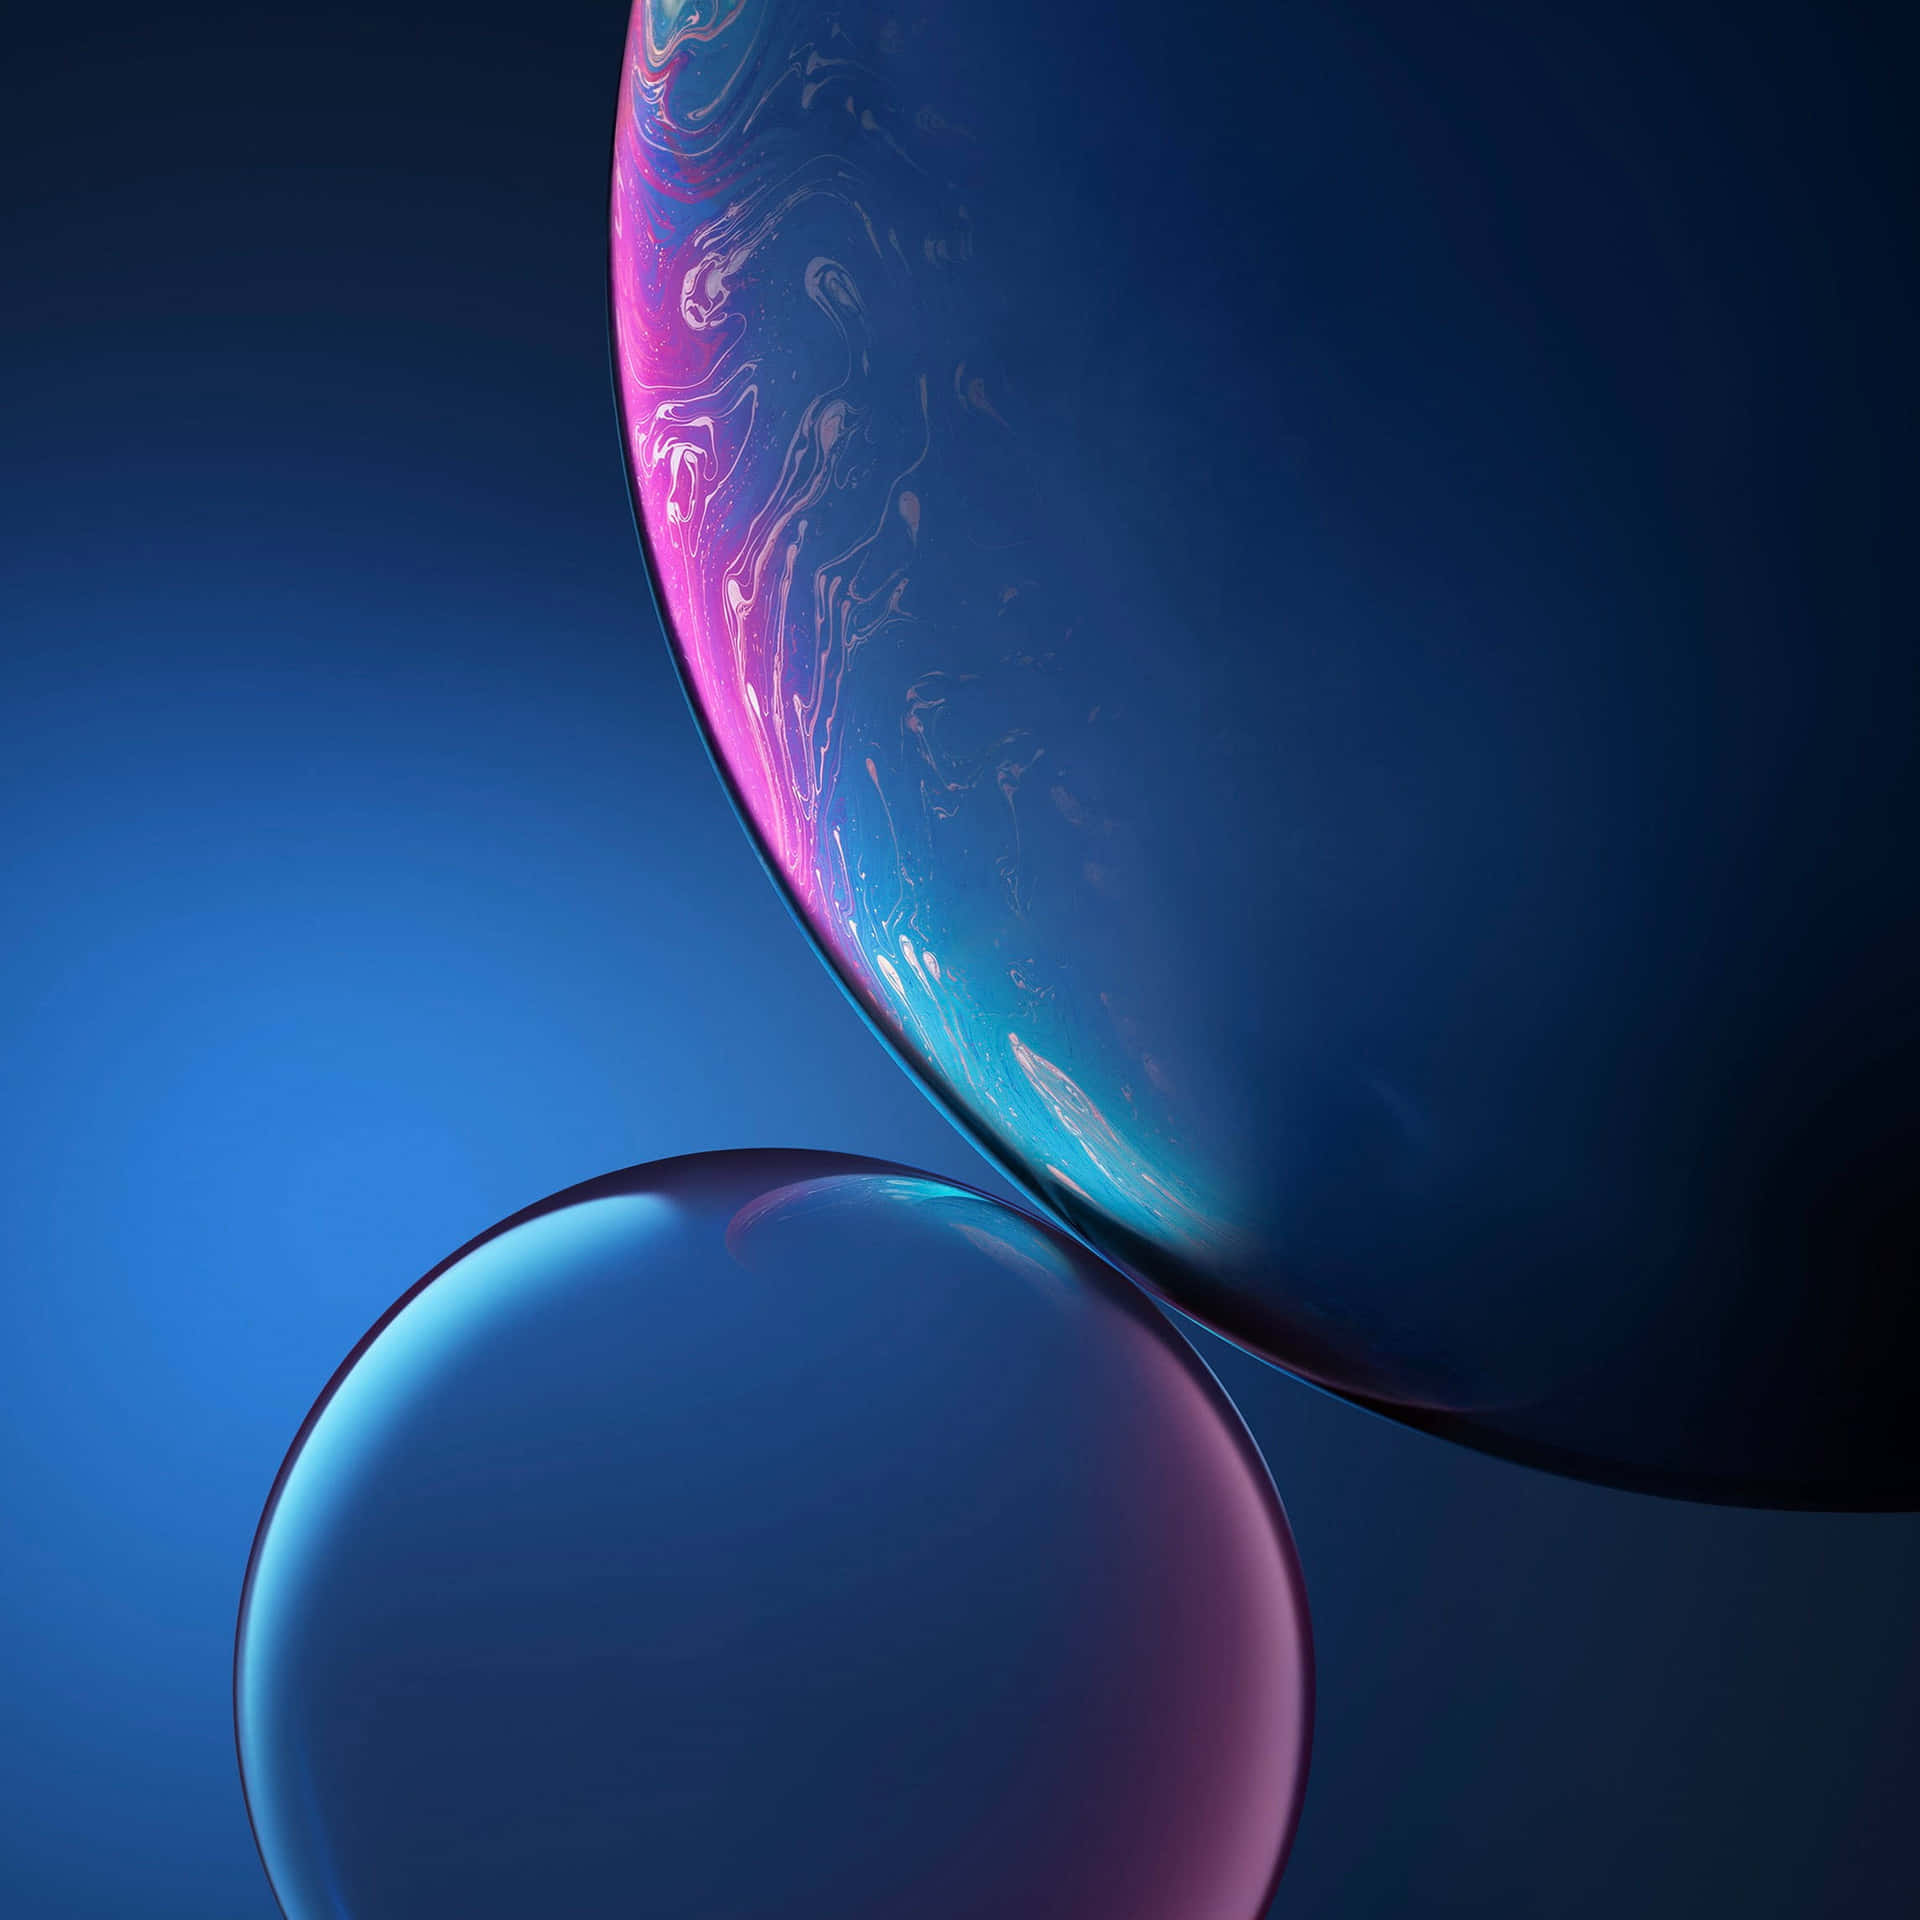 "Vibrant and Rich Blue Amoled" Wallpaper